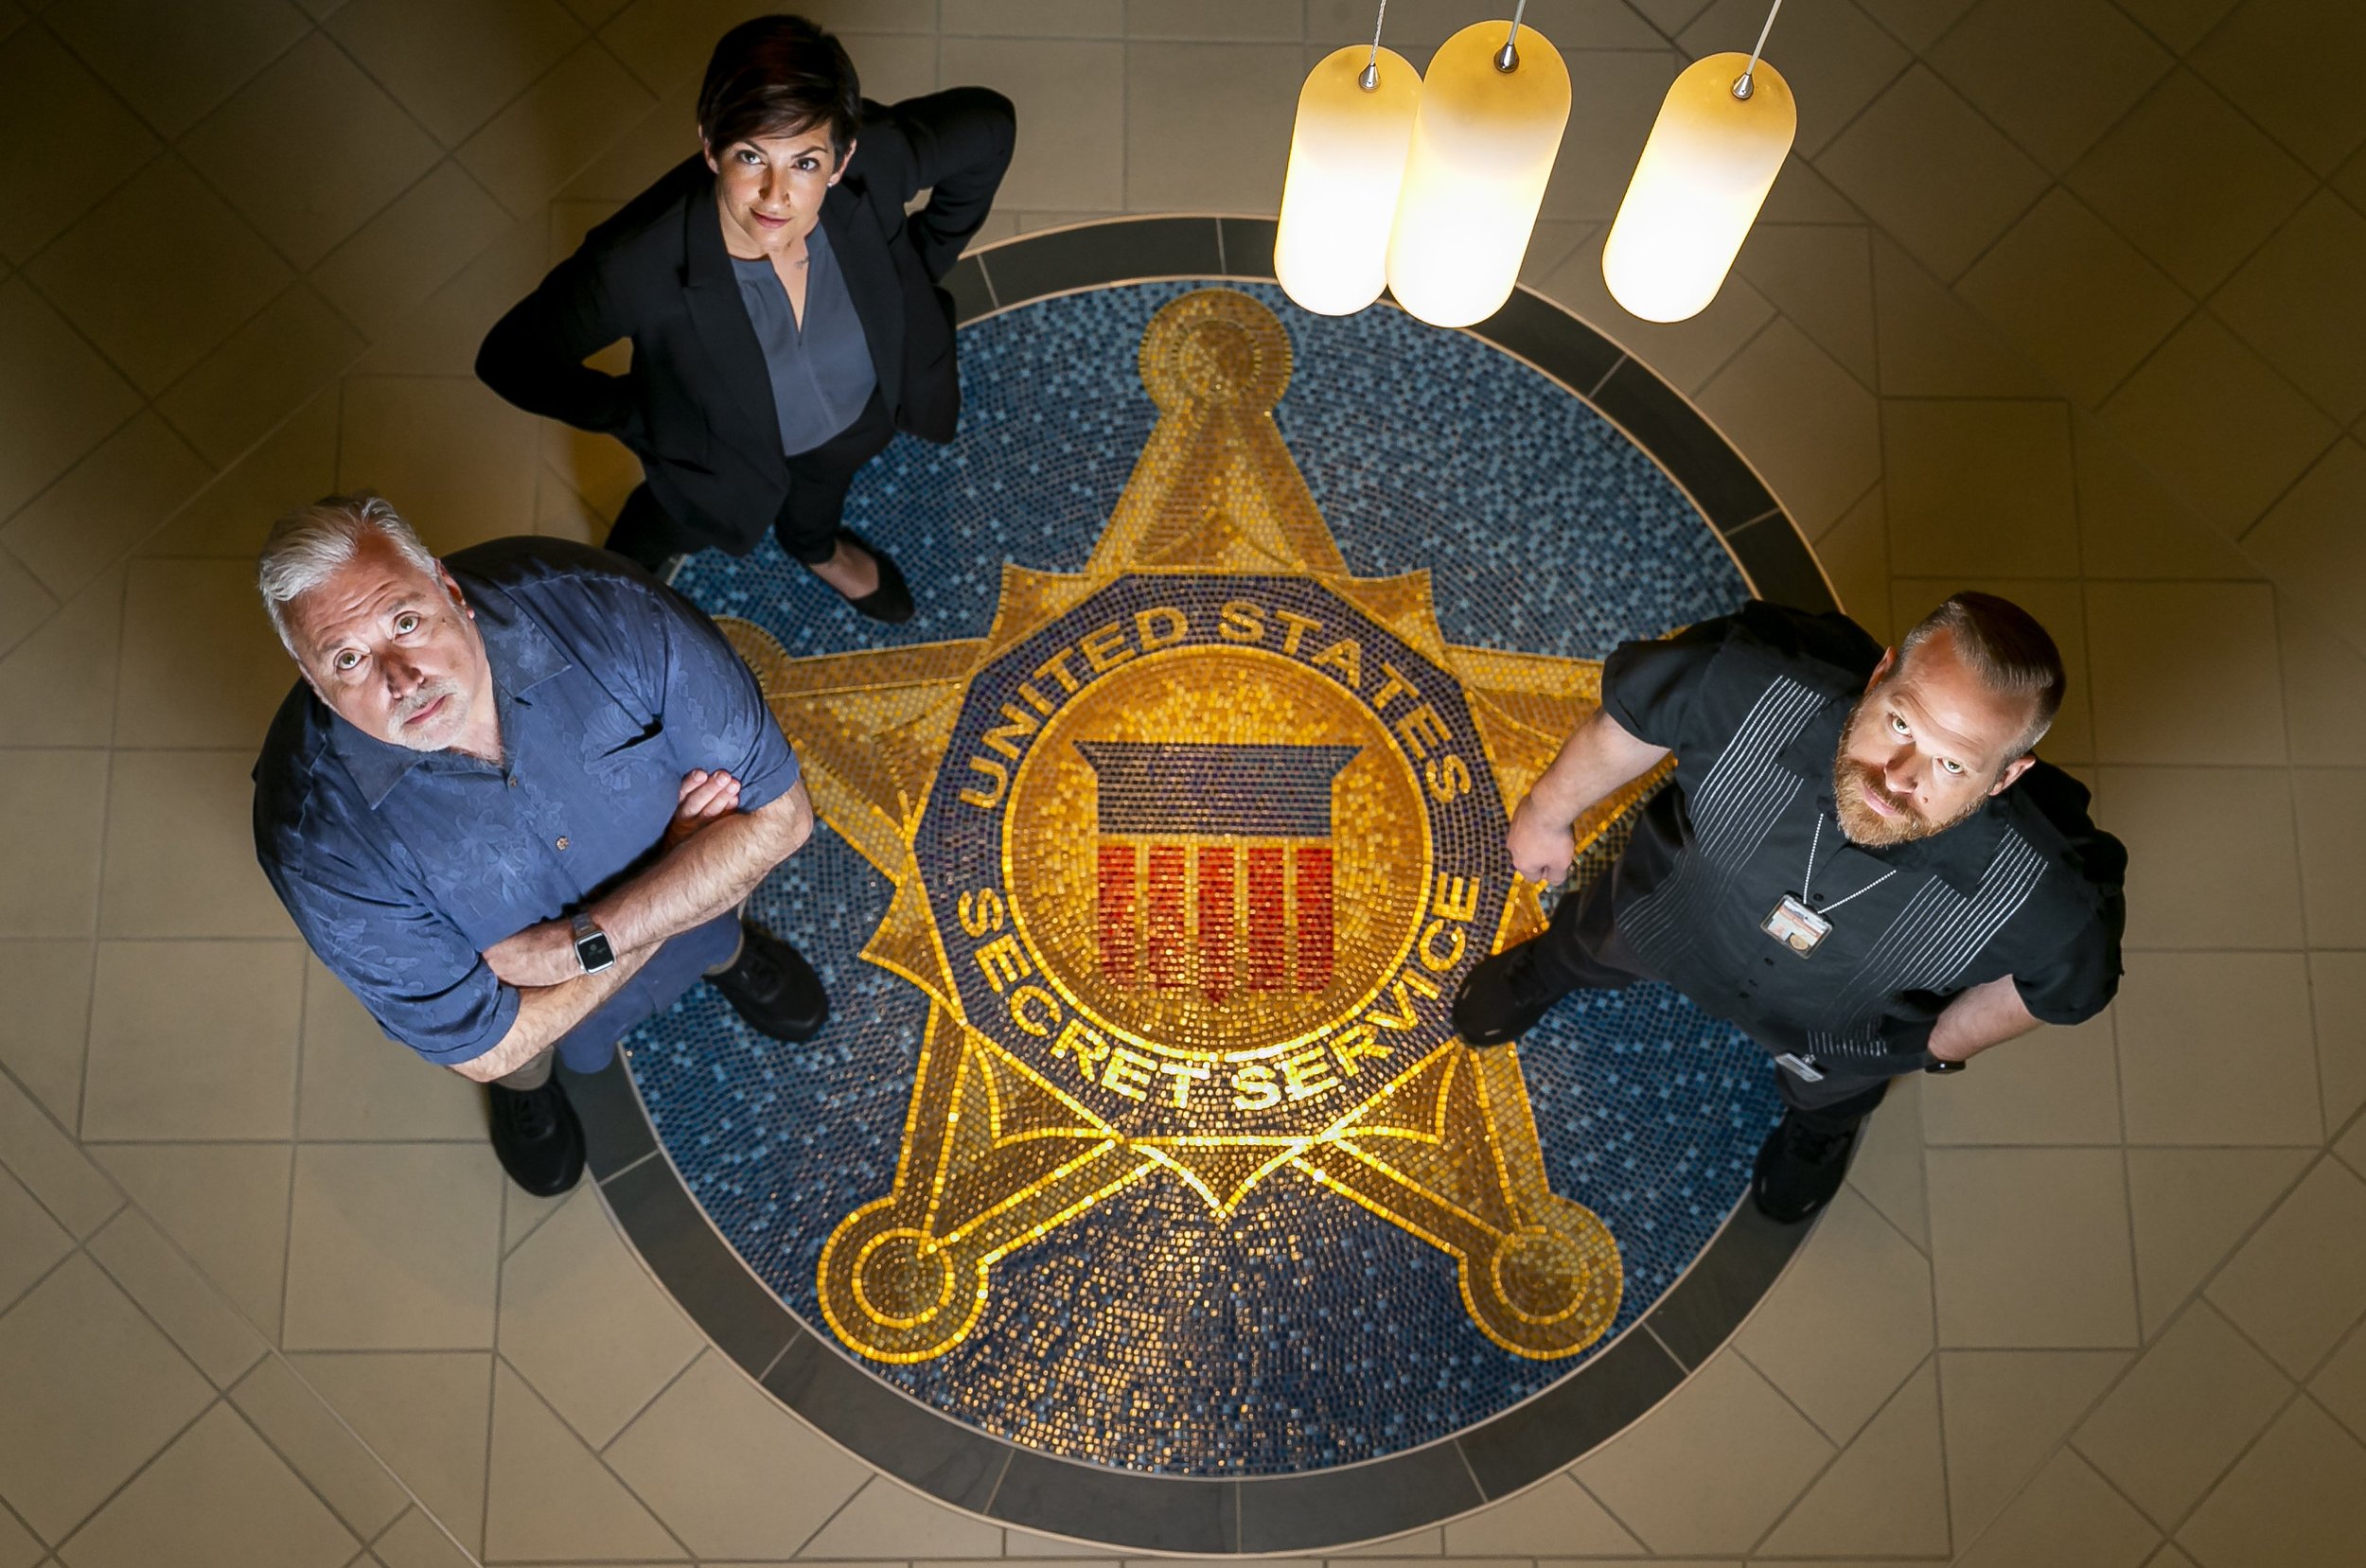  From left to right: Miami-Dade Police Major George Perera, Sergeant Bridget Doyle and Lieutenant Jordan Fried with South Florida Cyber Crimes Task Force are photographed at their offices on Wednesday, Aug. 3, 2022, in Miami, Fla. 